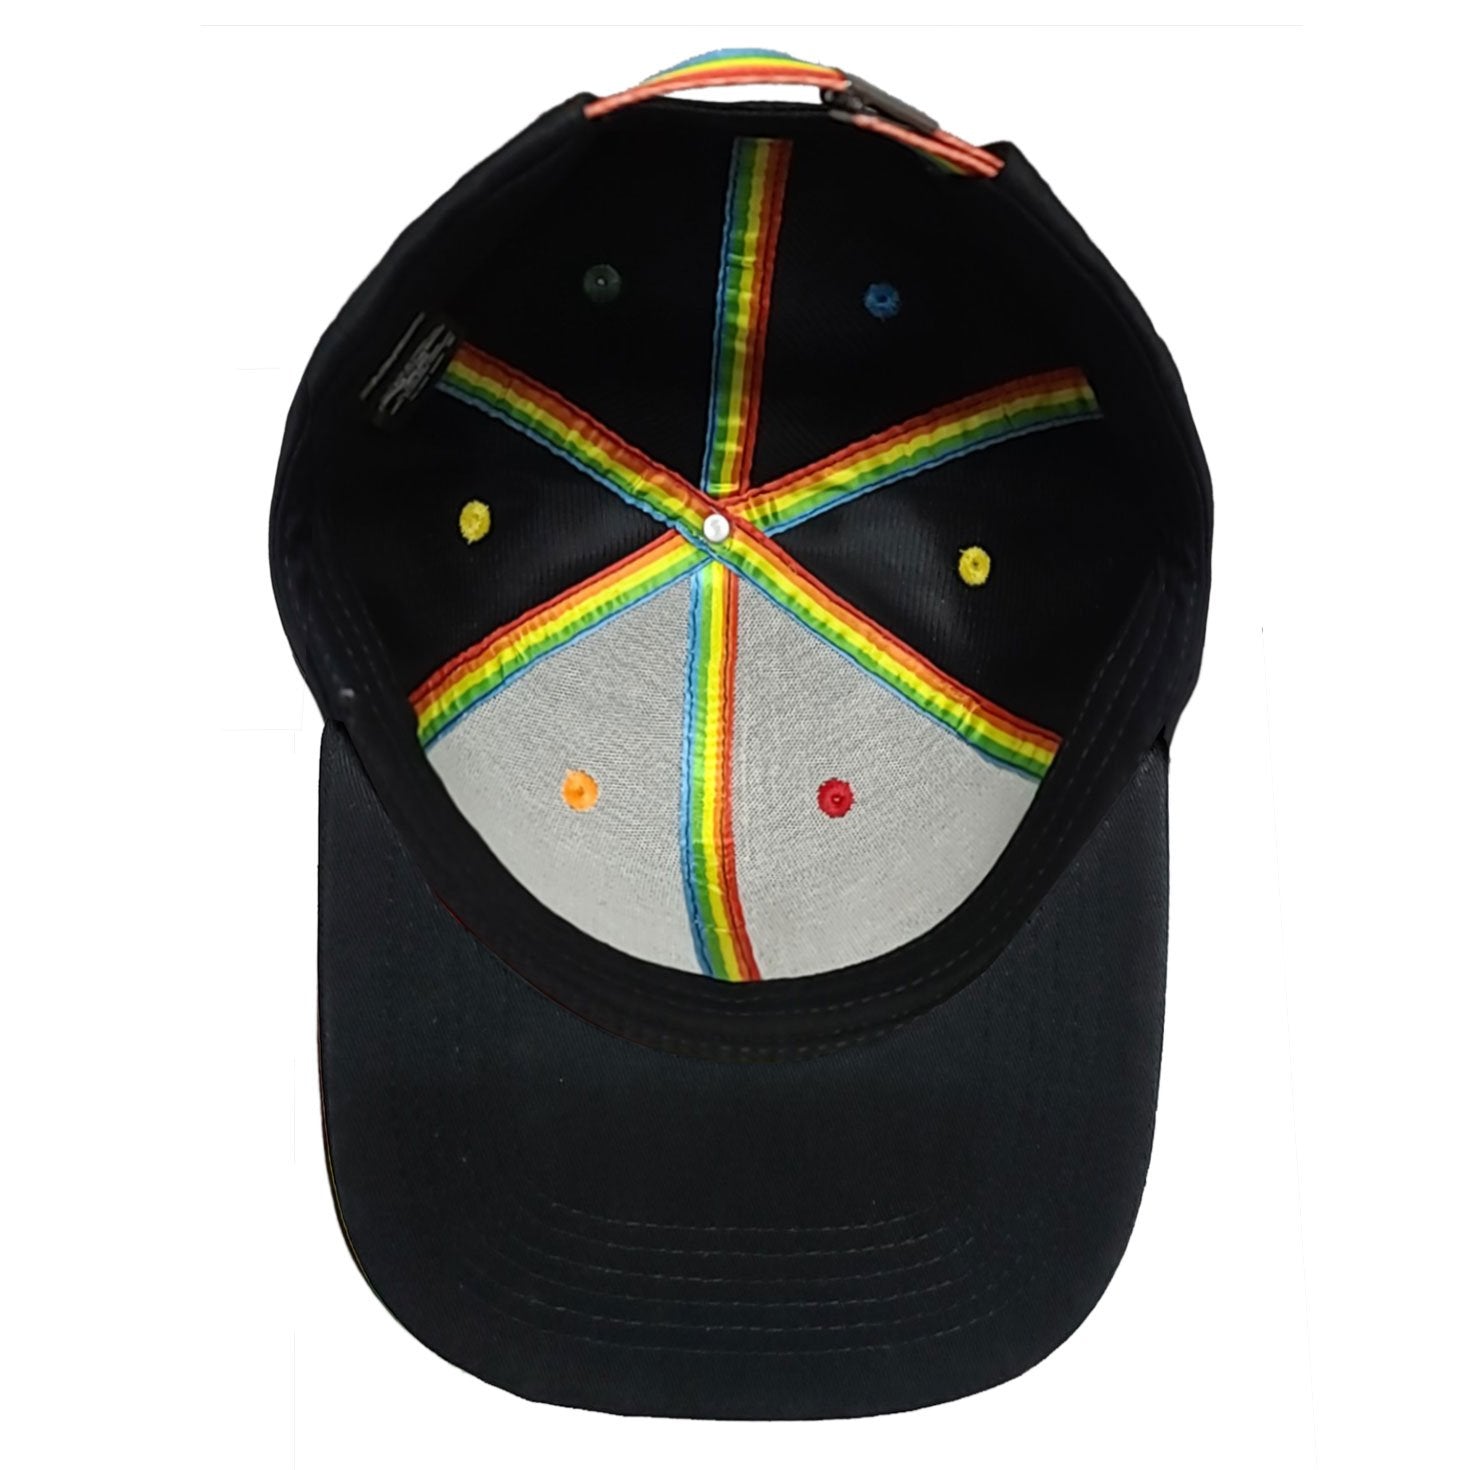 Activision Kaboom! Bucket Brigade Patch Cap with Rainbow Lining and Detailing